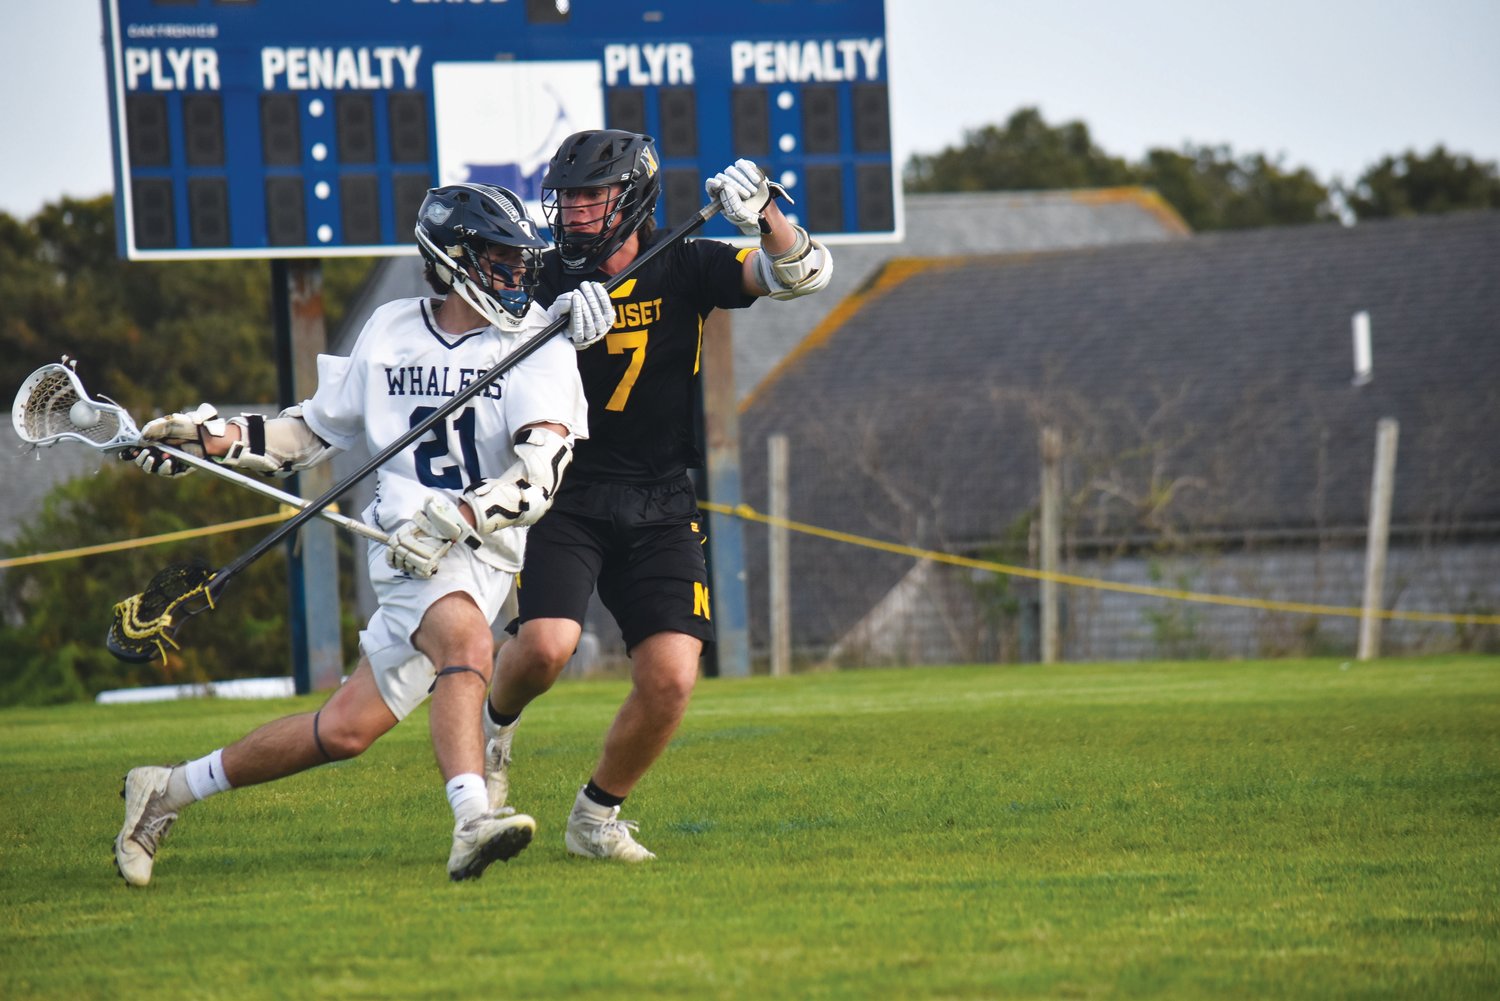 Colton Chambers battles a Nauset defender. Chambers led the Whalers in scoring against Nauset with four goals.